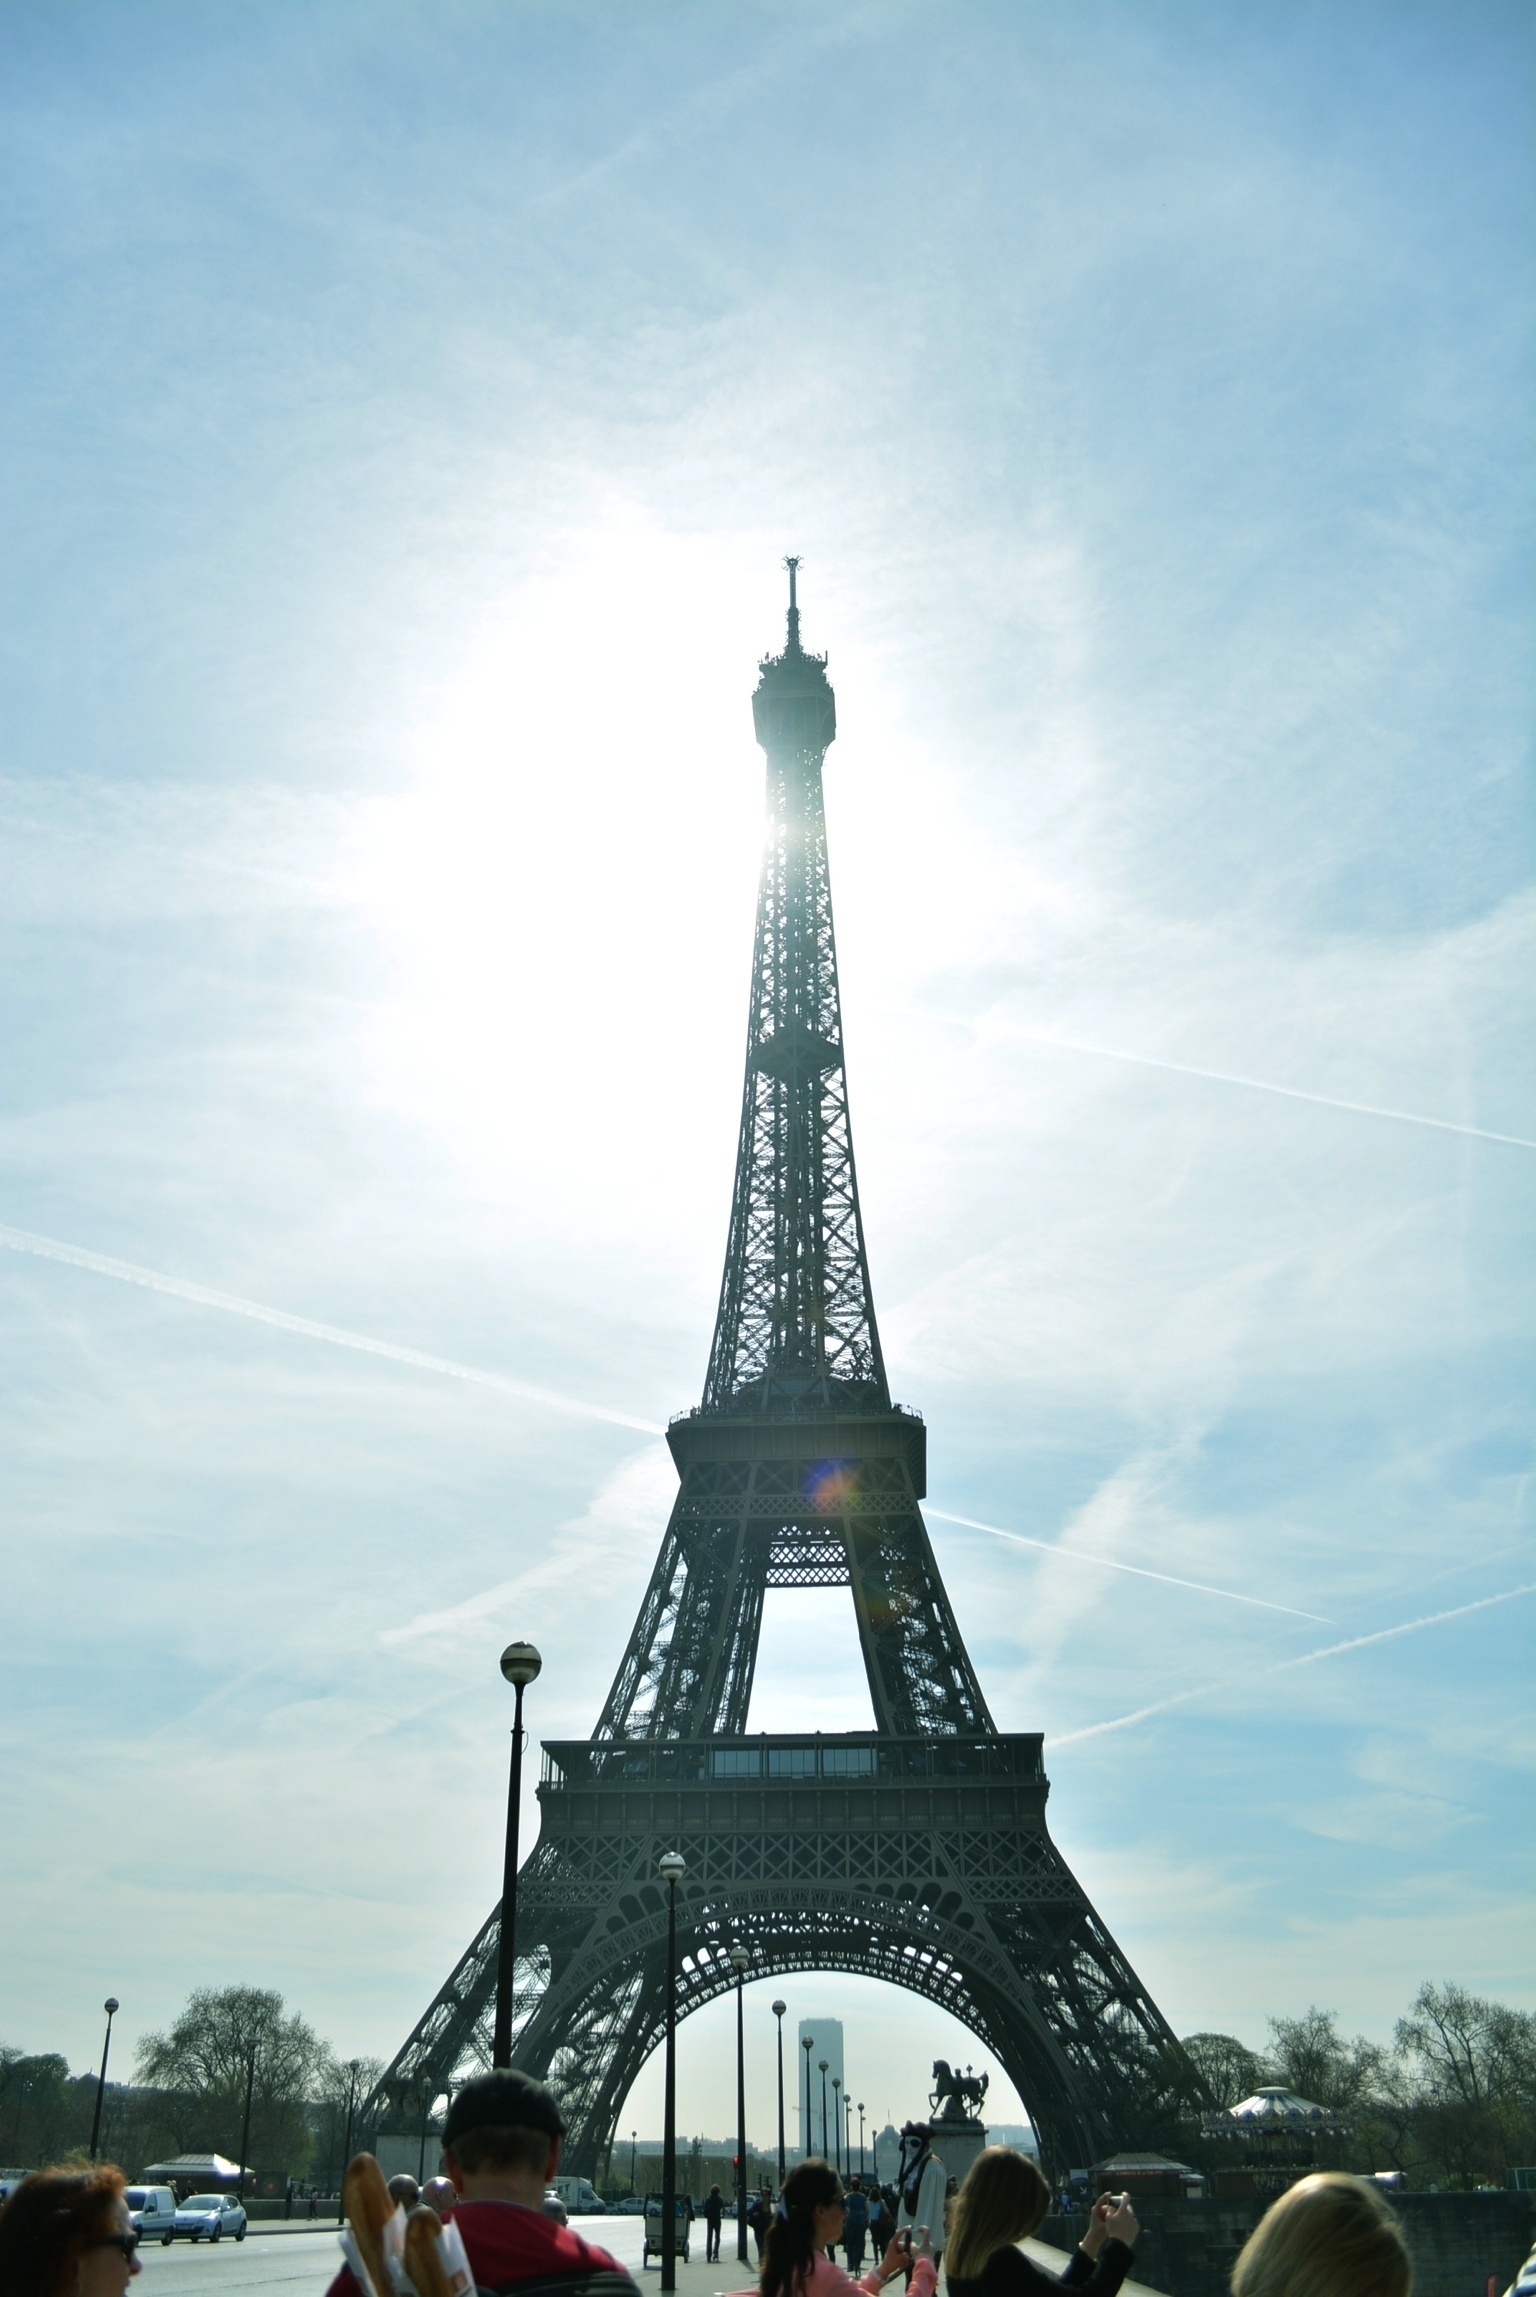 Sun shining behind the Eiffel Tower cast a flare of blinding light.